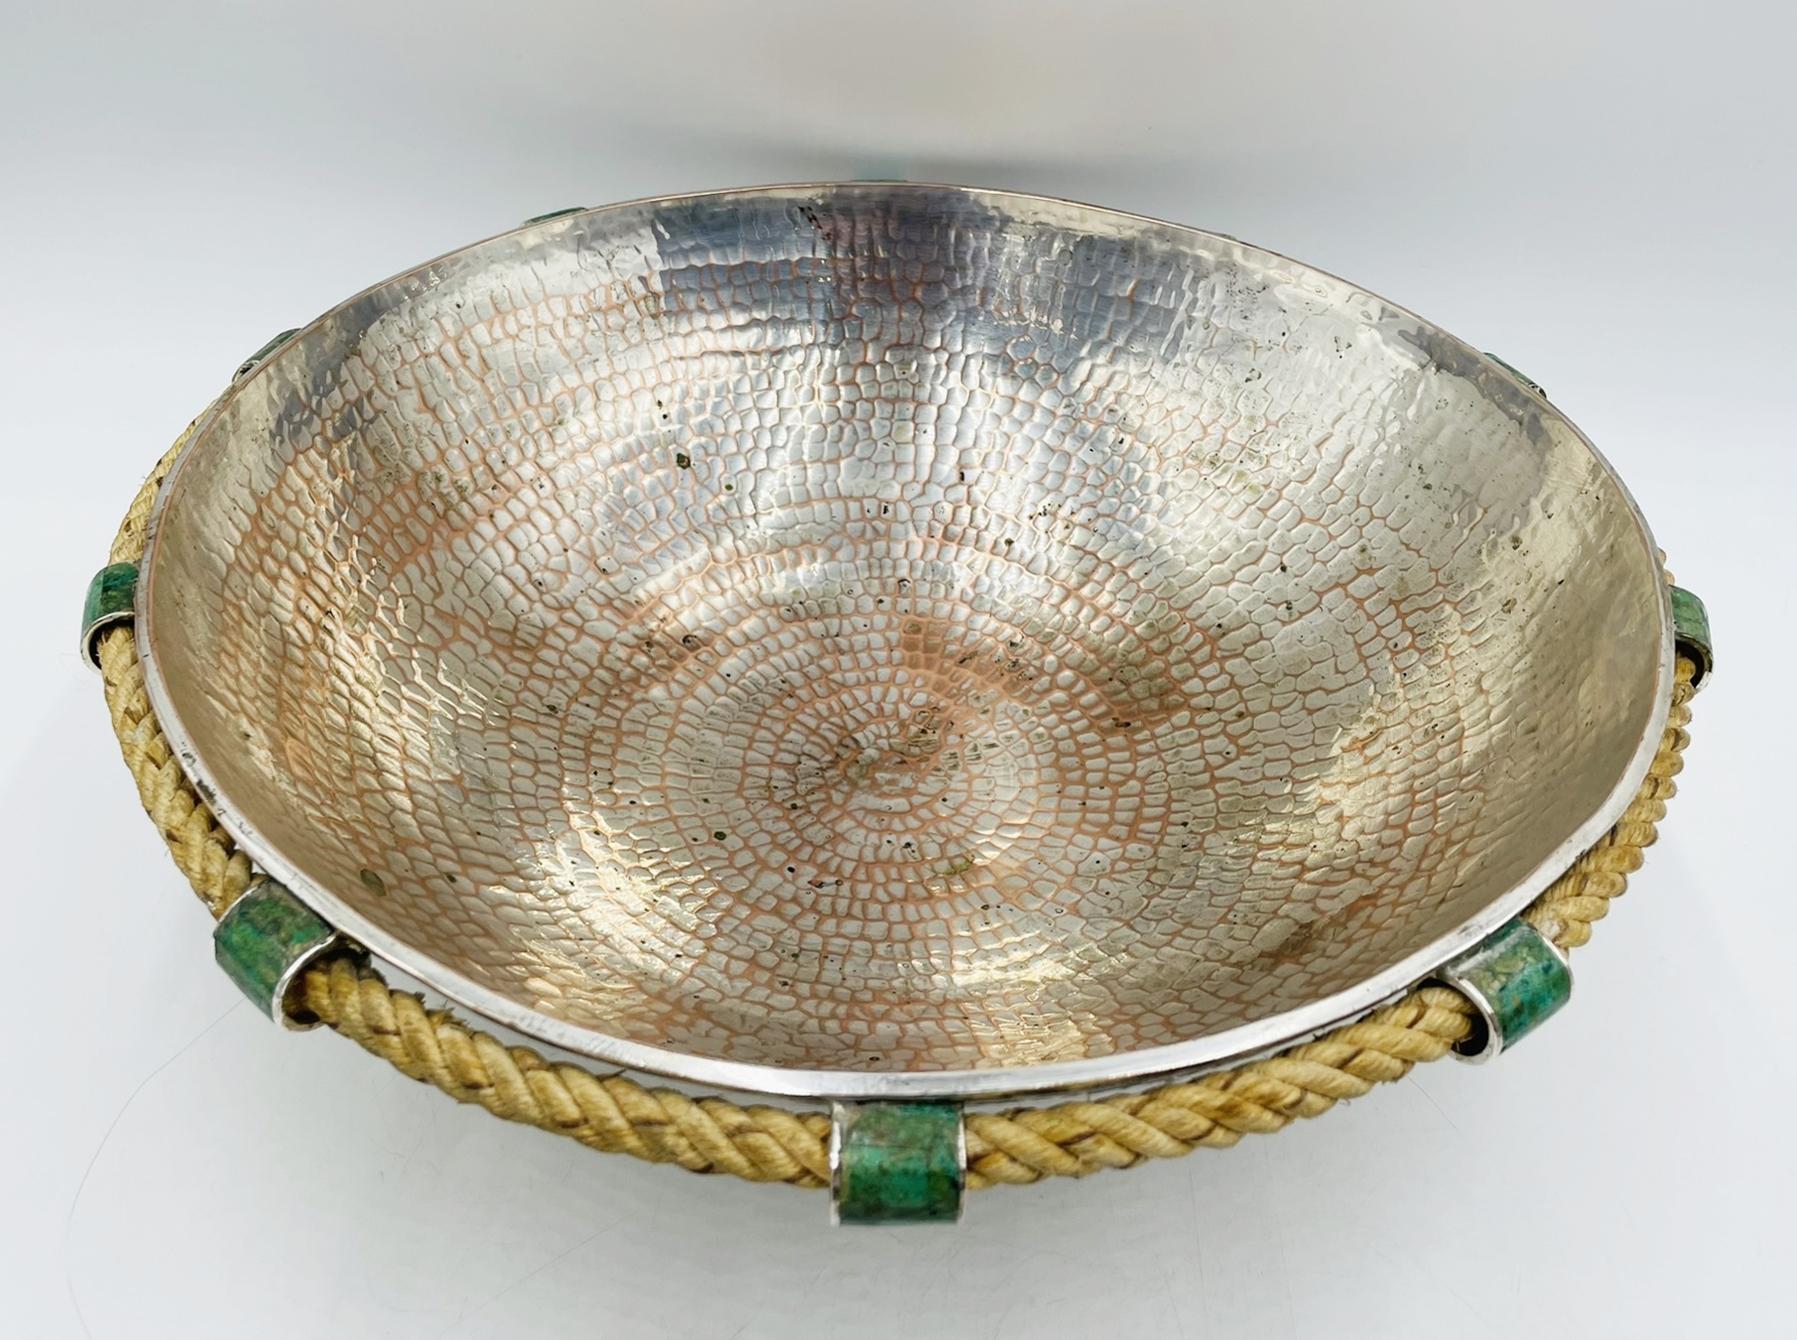 Elevate your home decor with this exquisite Vintage Emilia Castillo Bowl with Rope & Malachite Accents, originating from Mexico in the 1990s.
The piece was made in Taxco mexico by skilled artisans that have been doing this type of work for